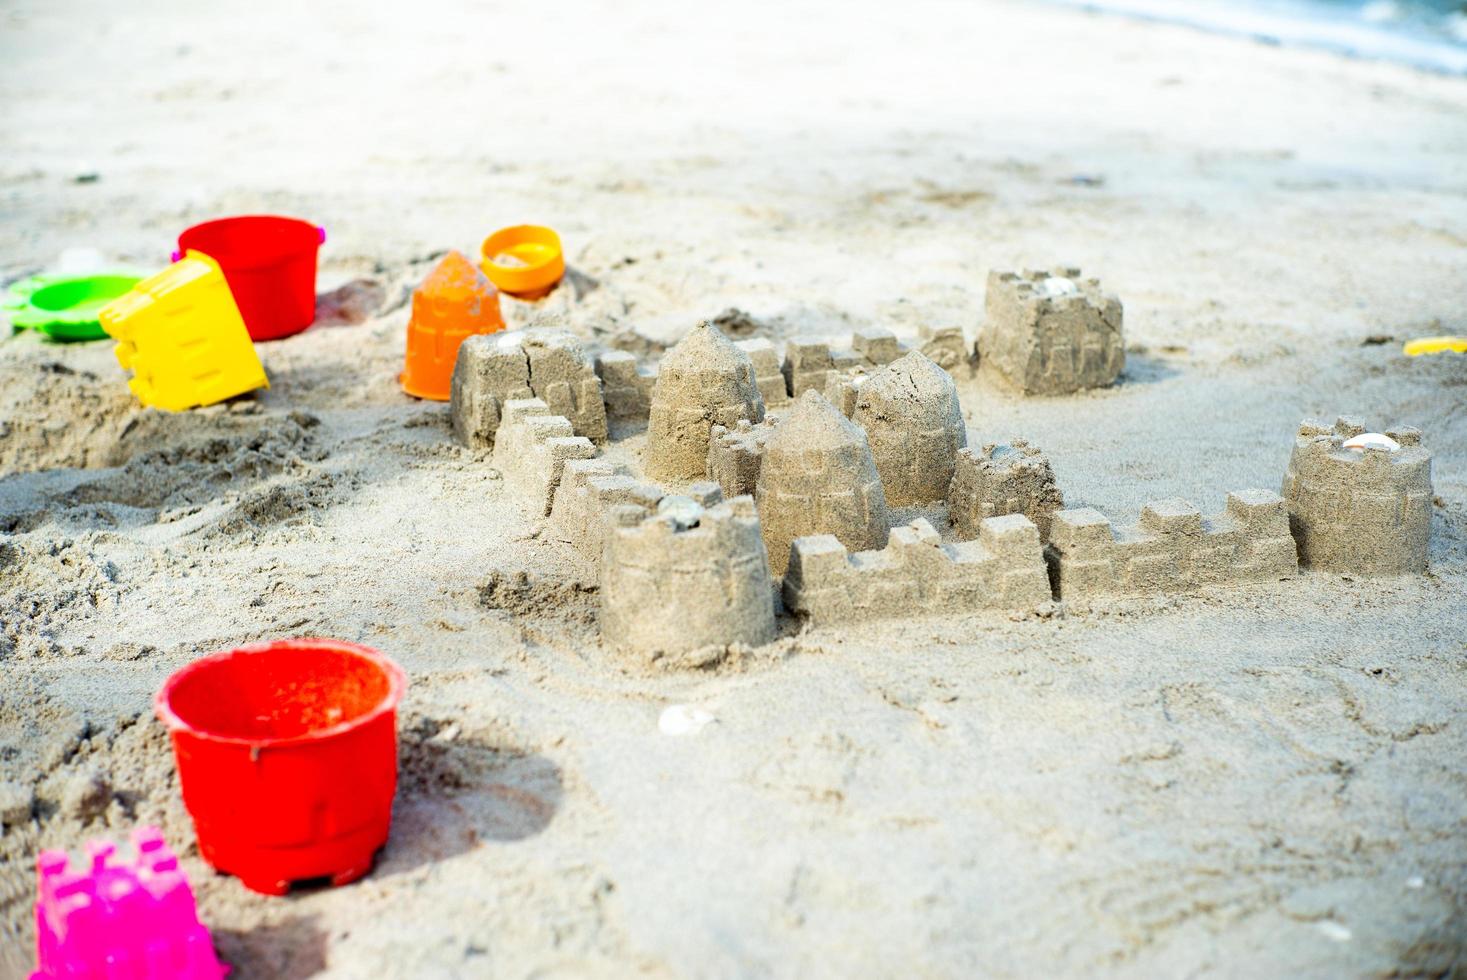 The sandcastle built by using the plastic molds on the beach photo